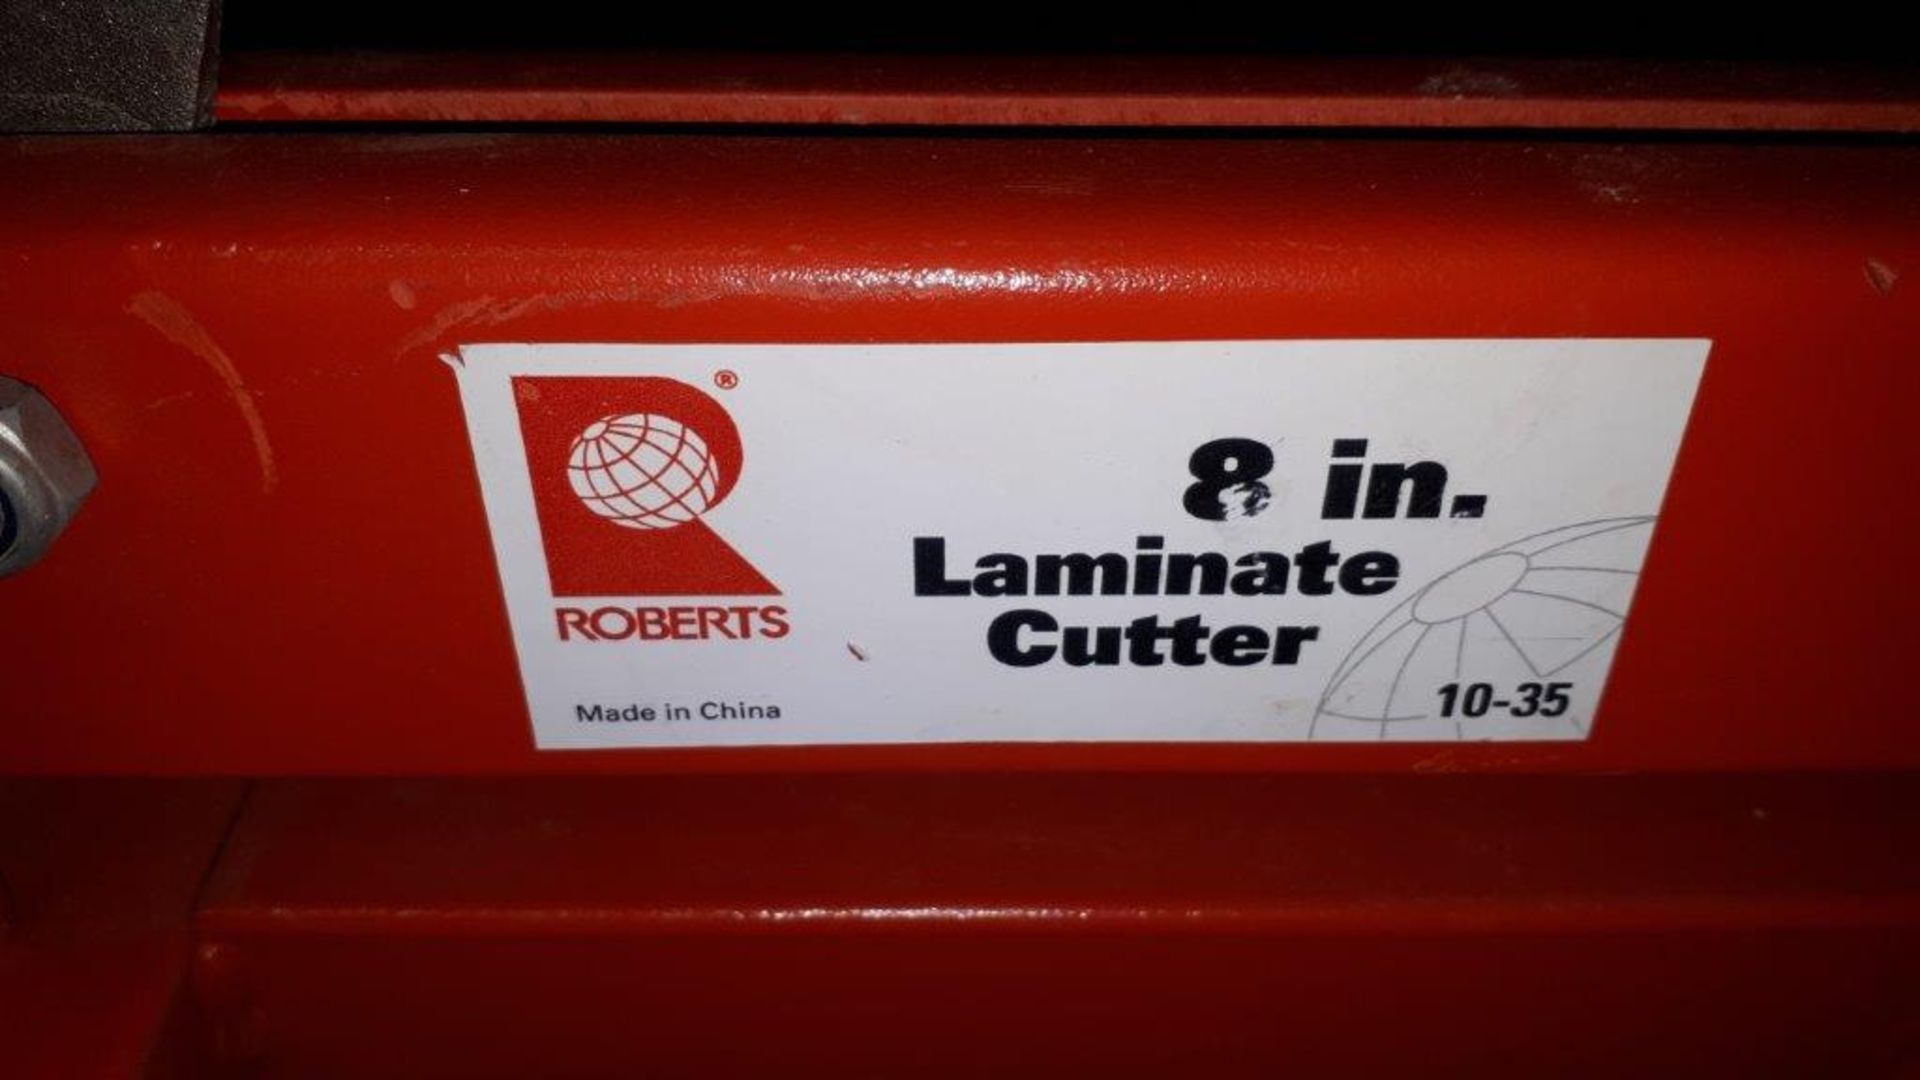 ROBERTS 8" Laminate Cutter (for floating laminate flooring) - Image 3 of 3